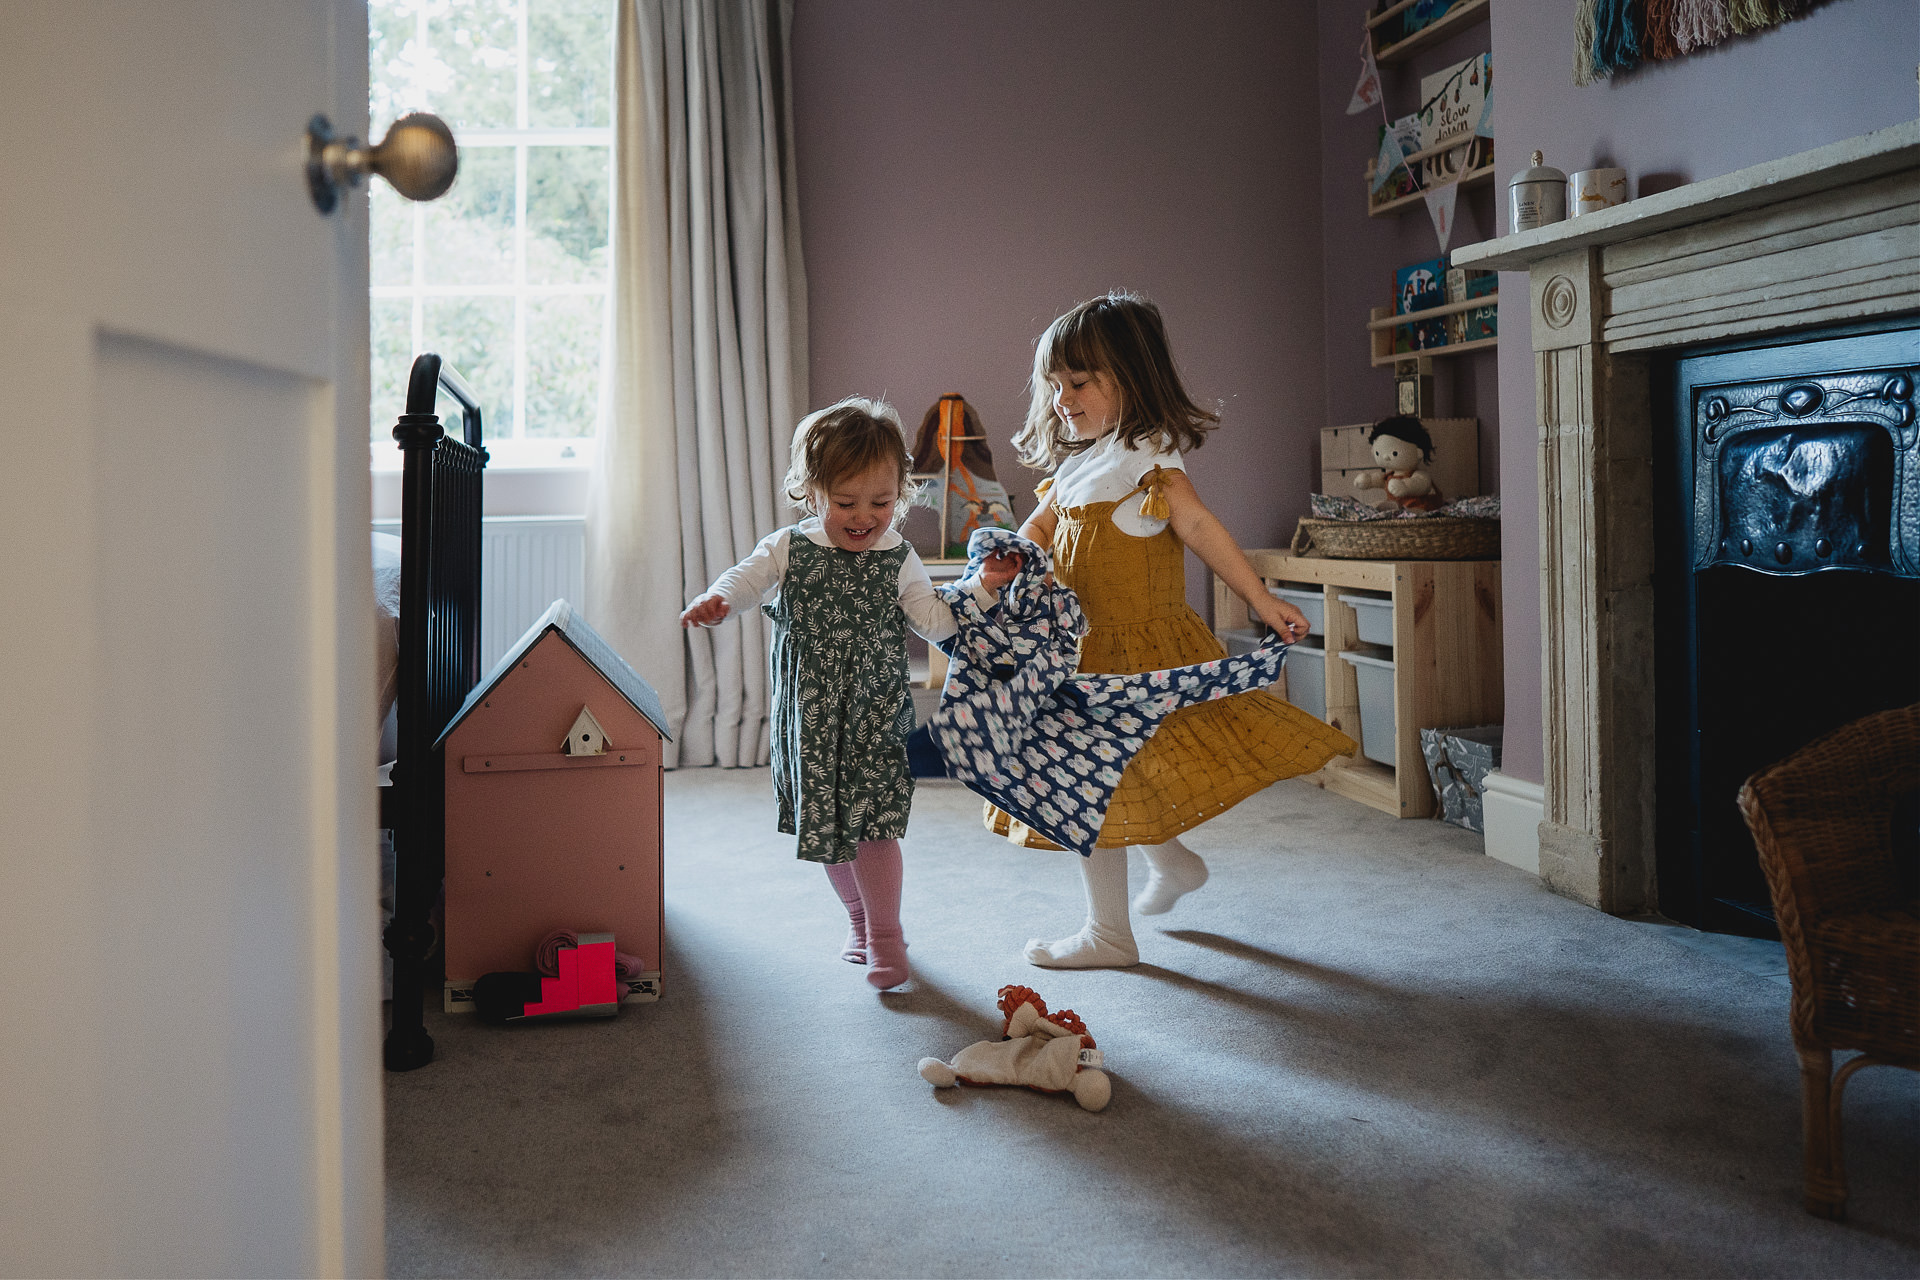 Best Devon family photography of two young sisters playing in a bedroom together